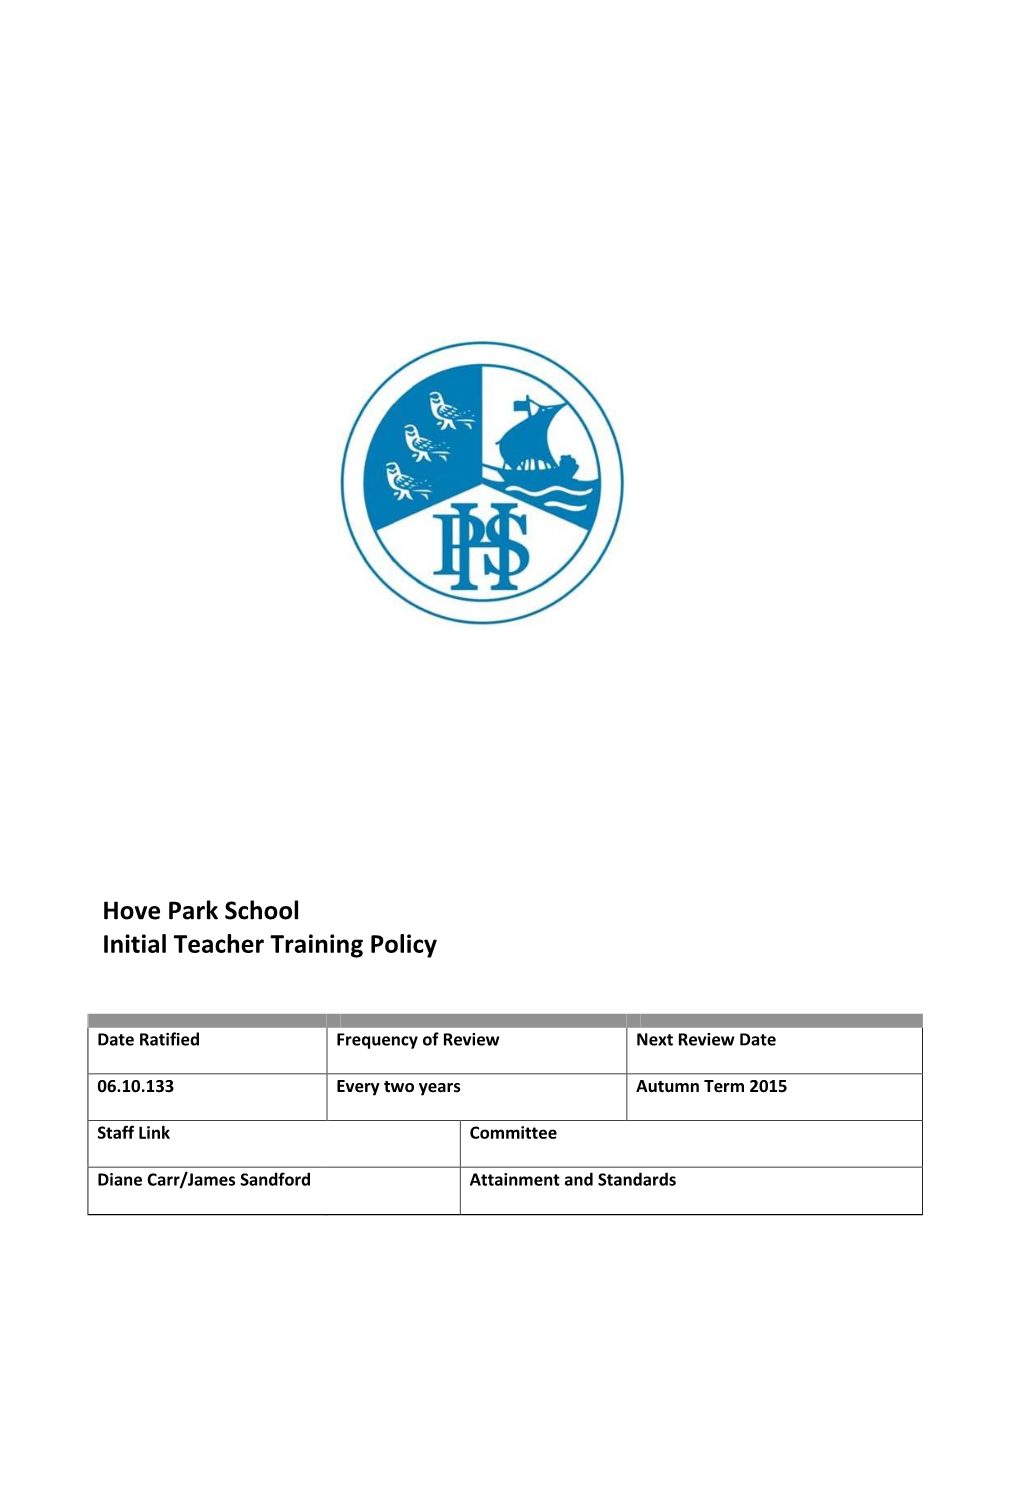 Hove Park School Initial Teacher Training Policy